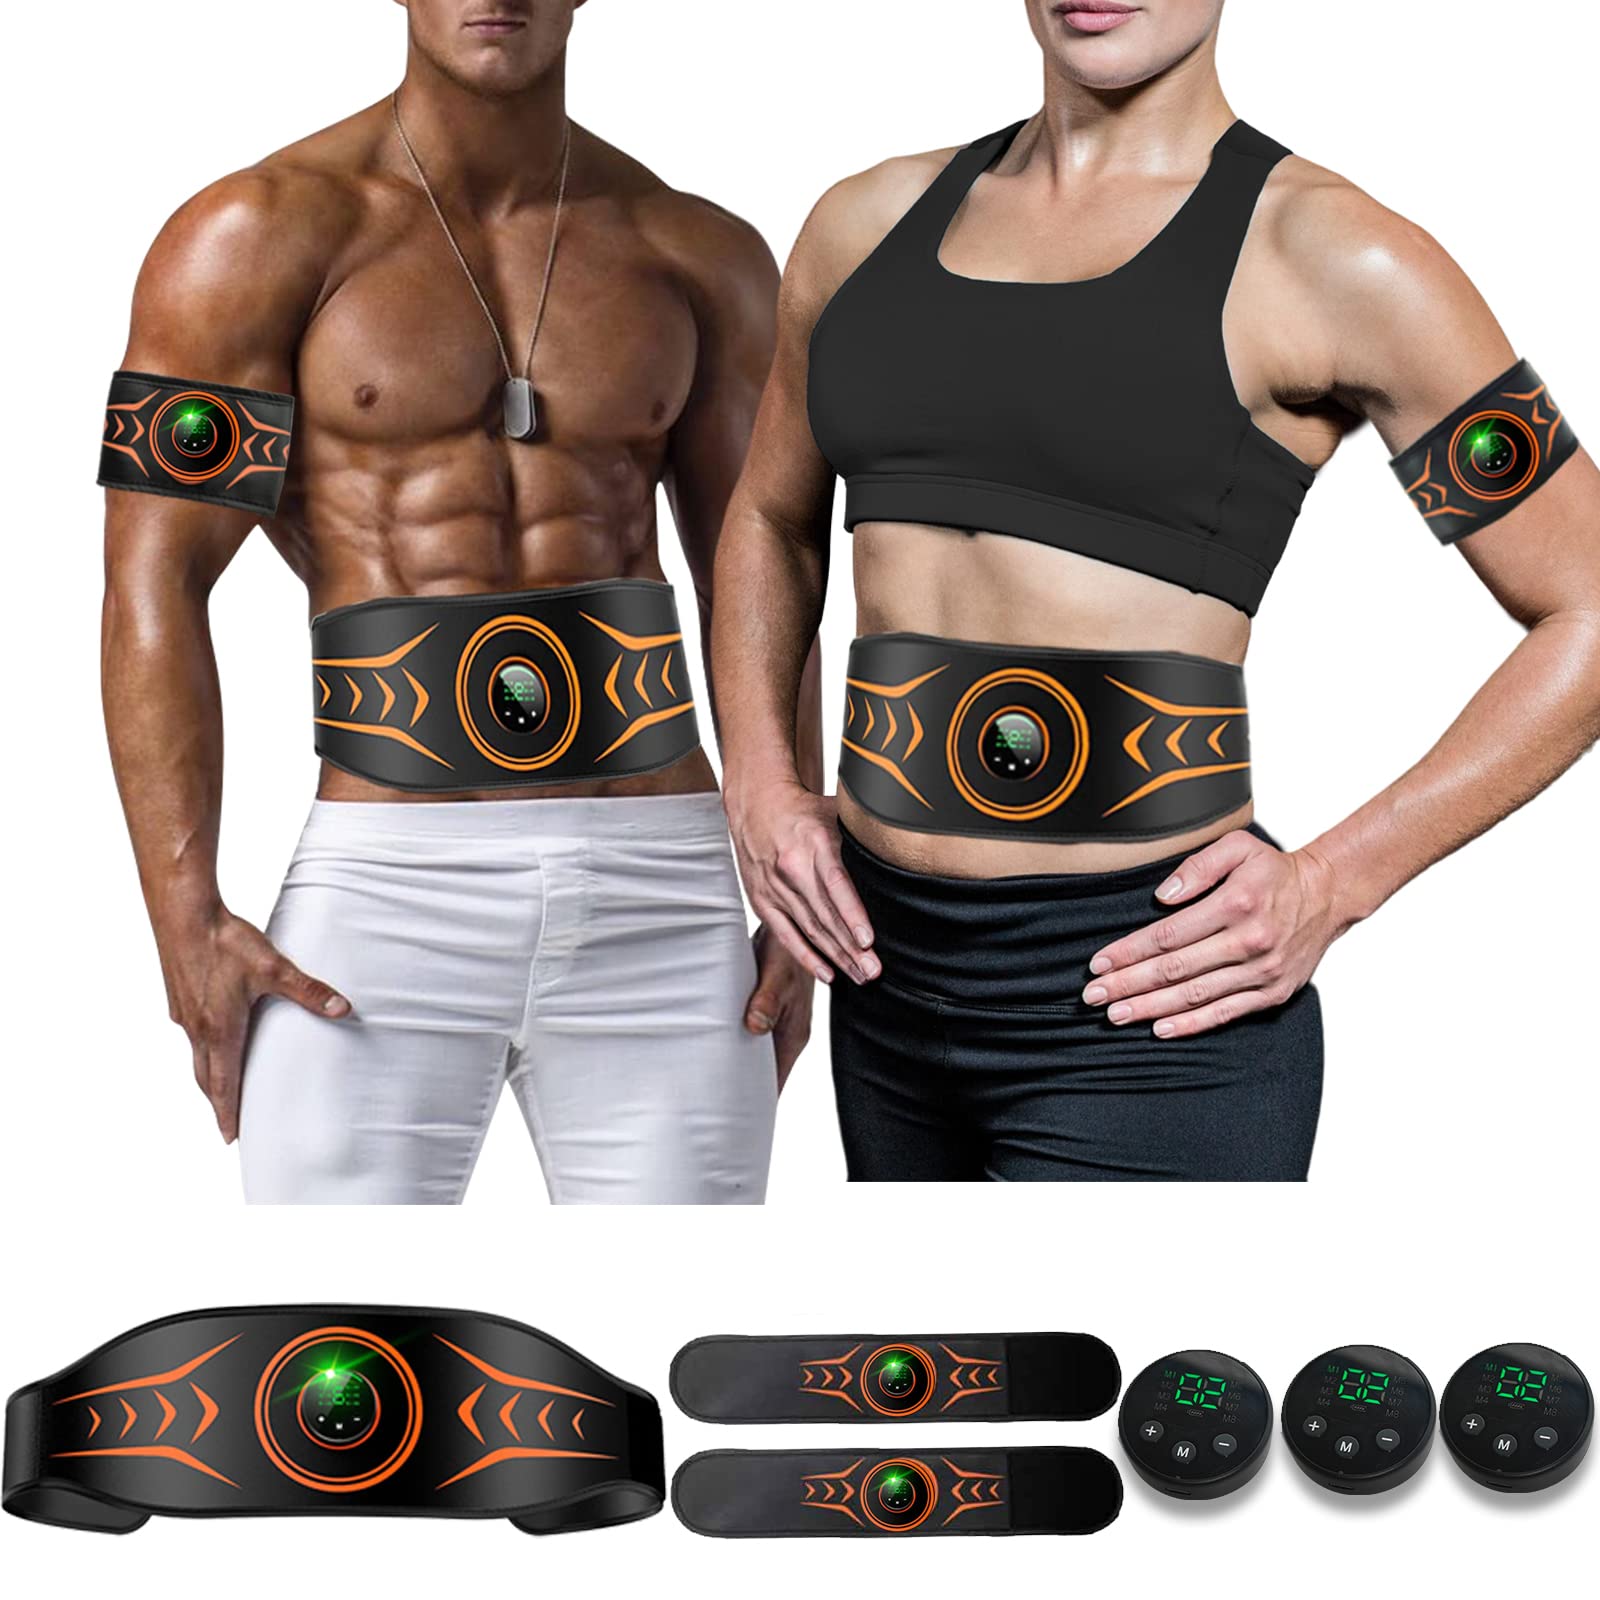 ABS Stimulator, Muscle Machine Workout Equipment, Ab Toning Belt Muscle  Toner Fitness Training for Abdomen/Arm/Leg, Ab Trainer for Home Body Shape